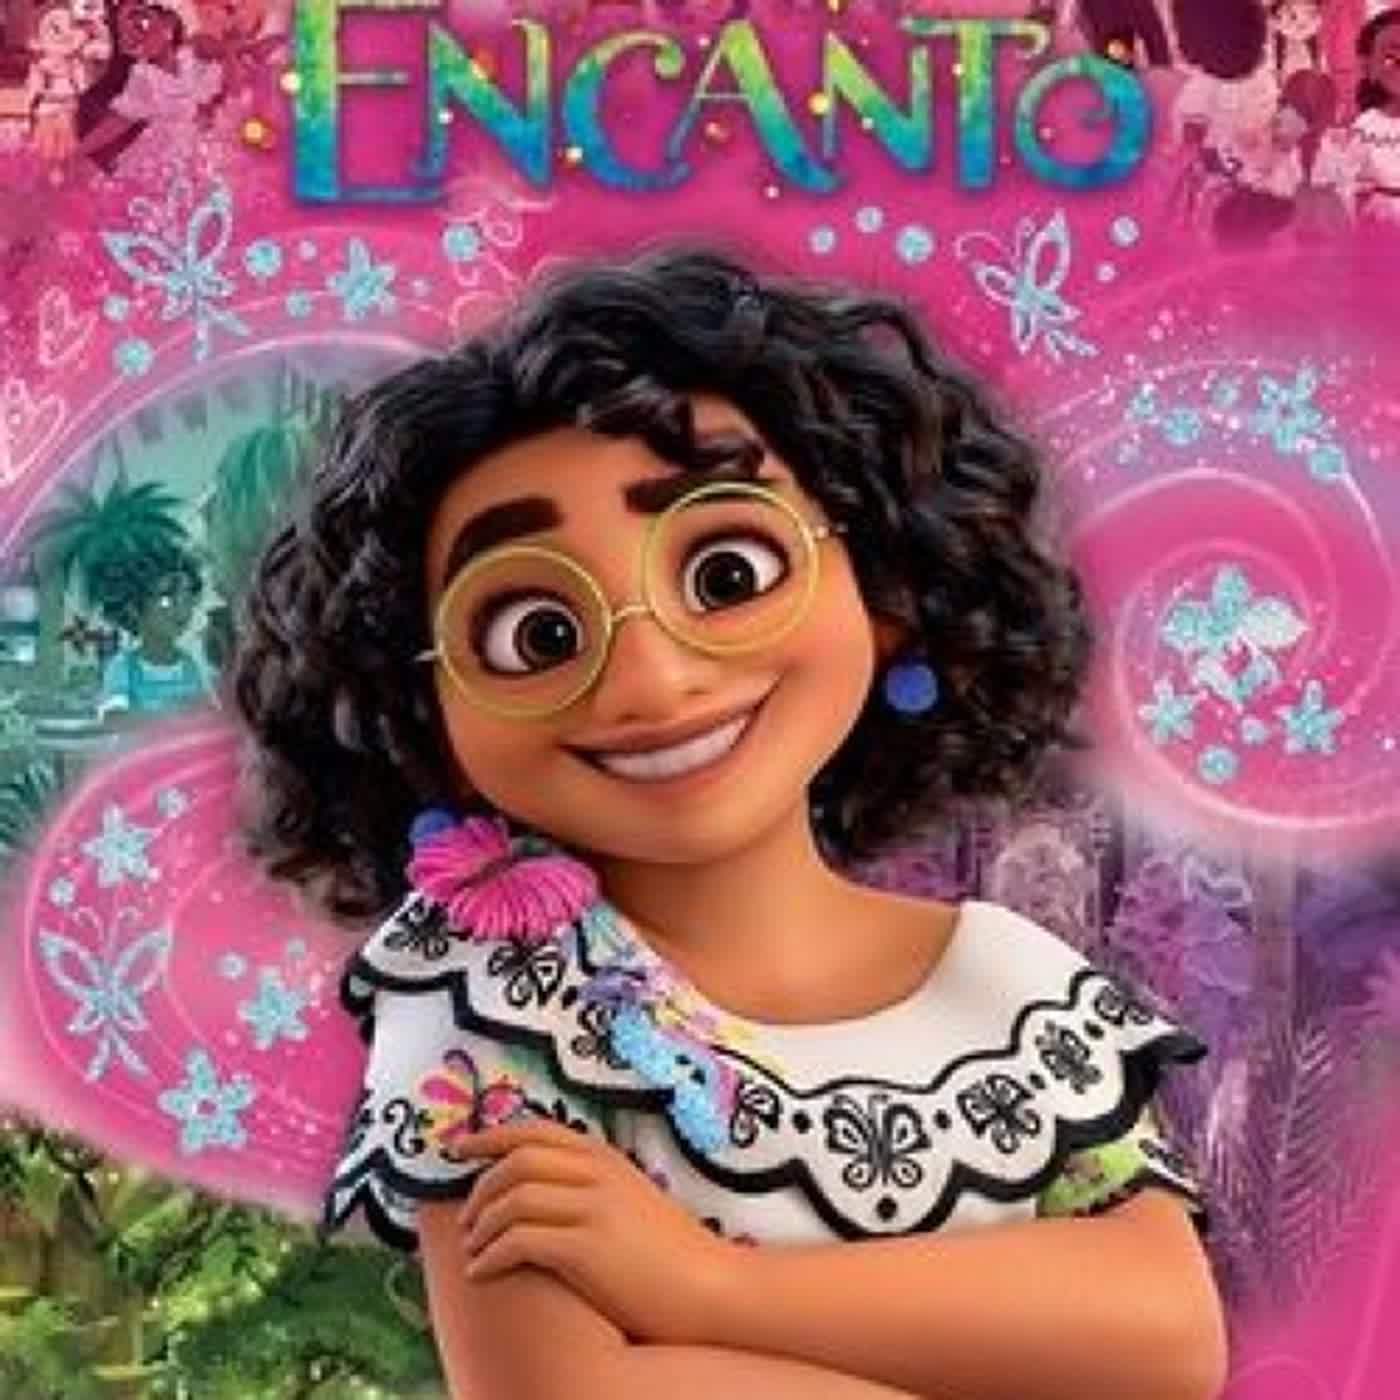 Disney Encanto Look and Find - by Pi Kids (Hardcover)